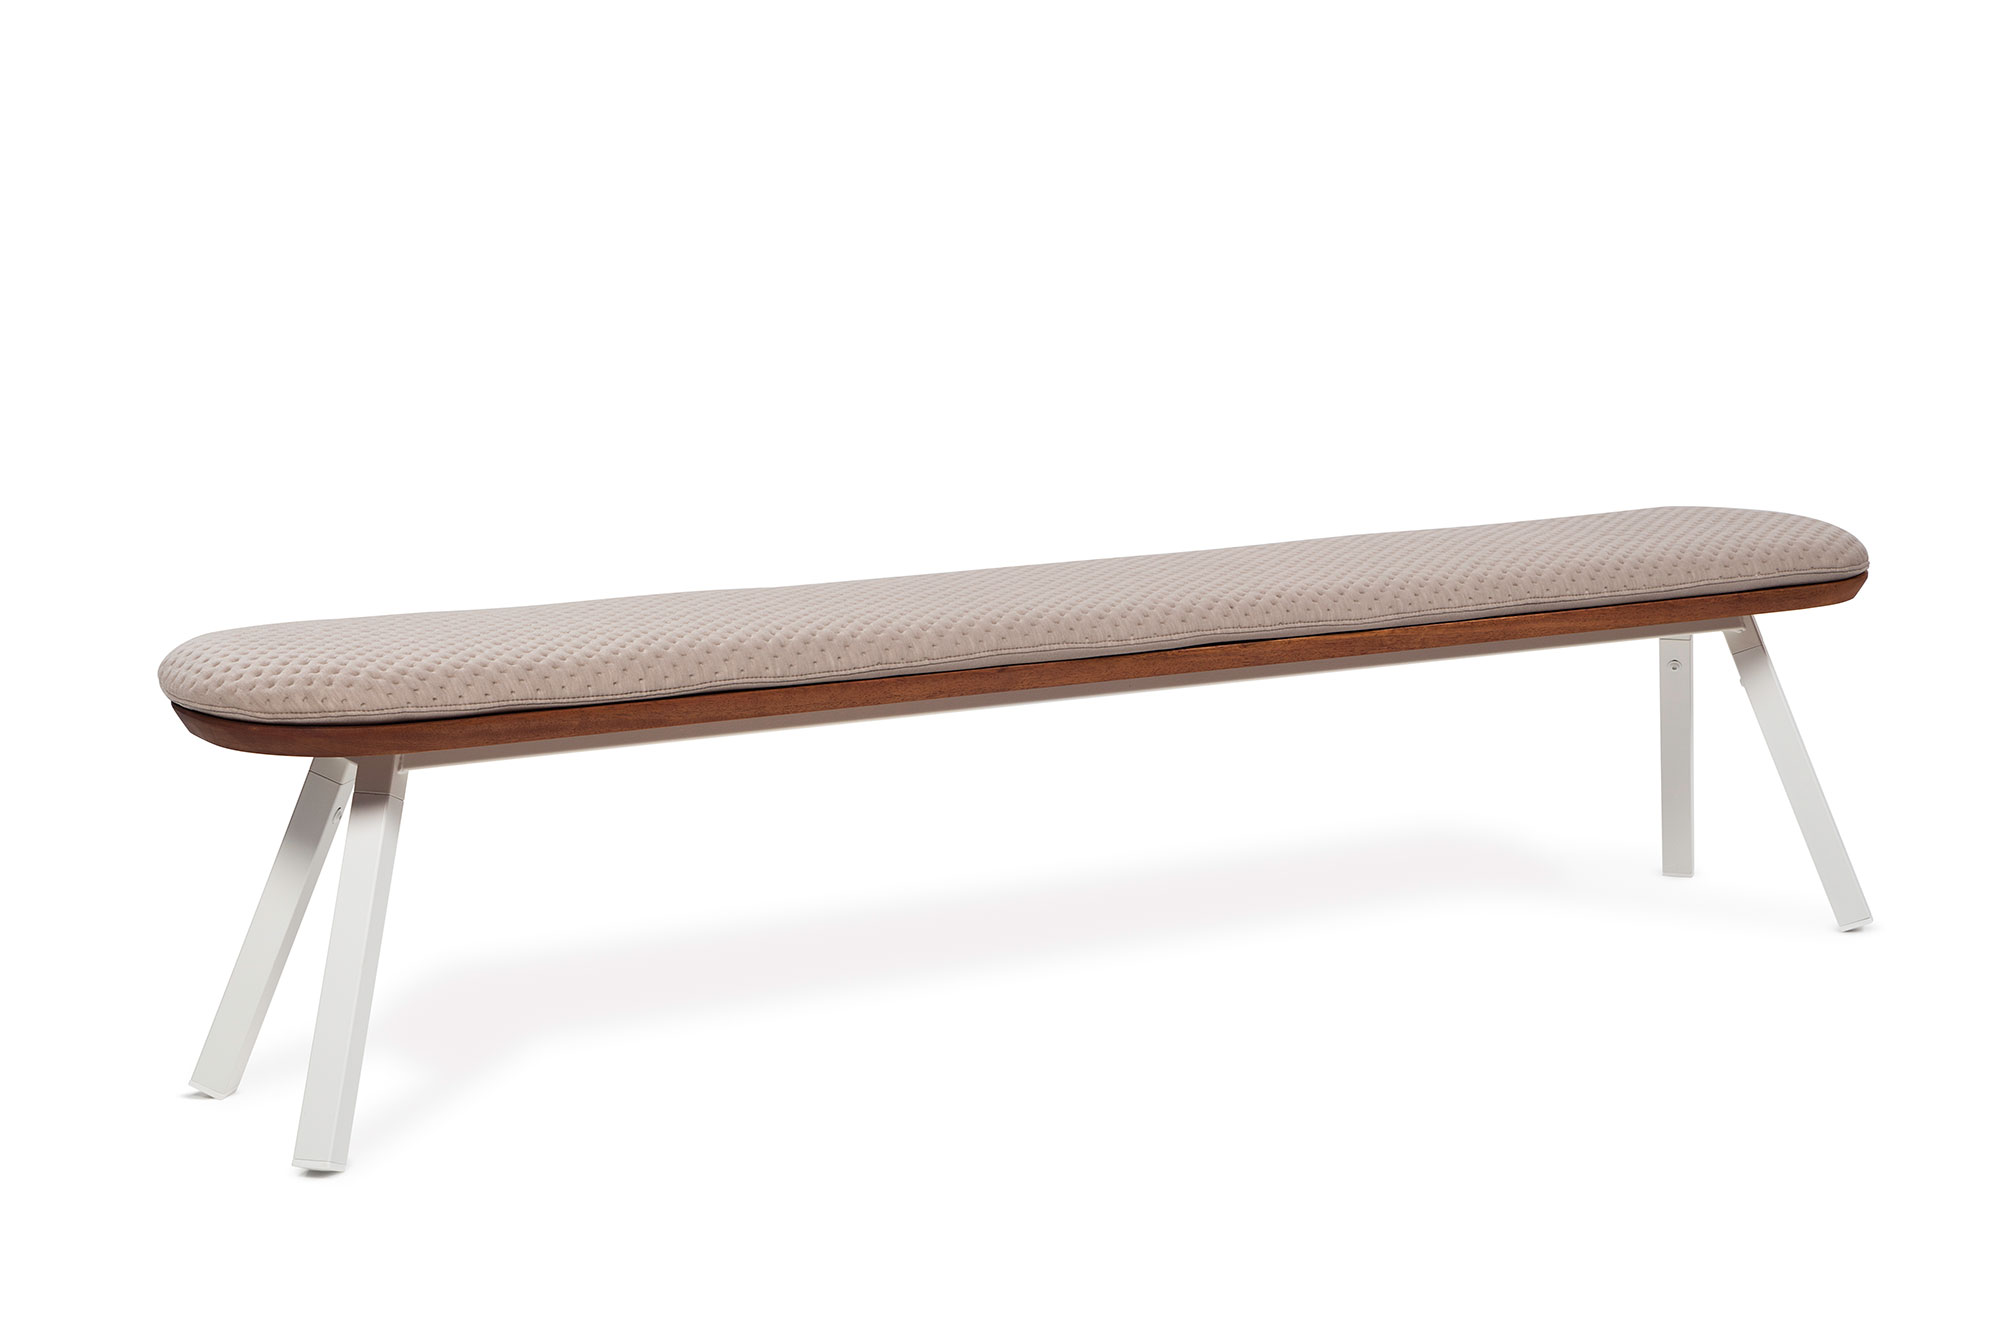 Seat cushion for the bench 220 cm "In- & outdoor" - design YM from RS Barcelona